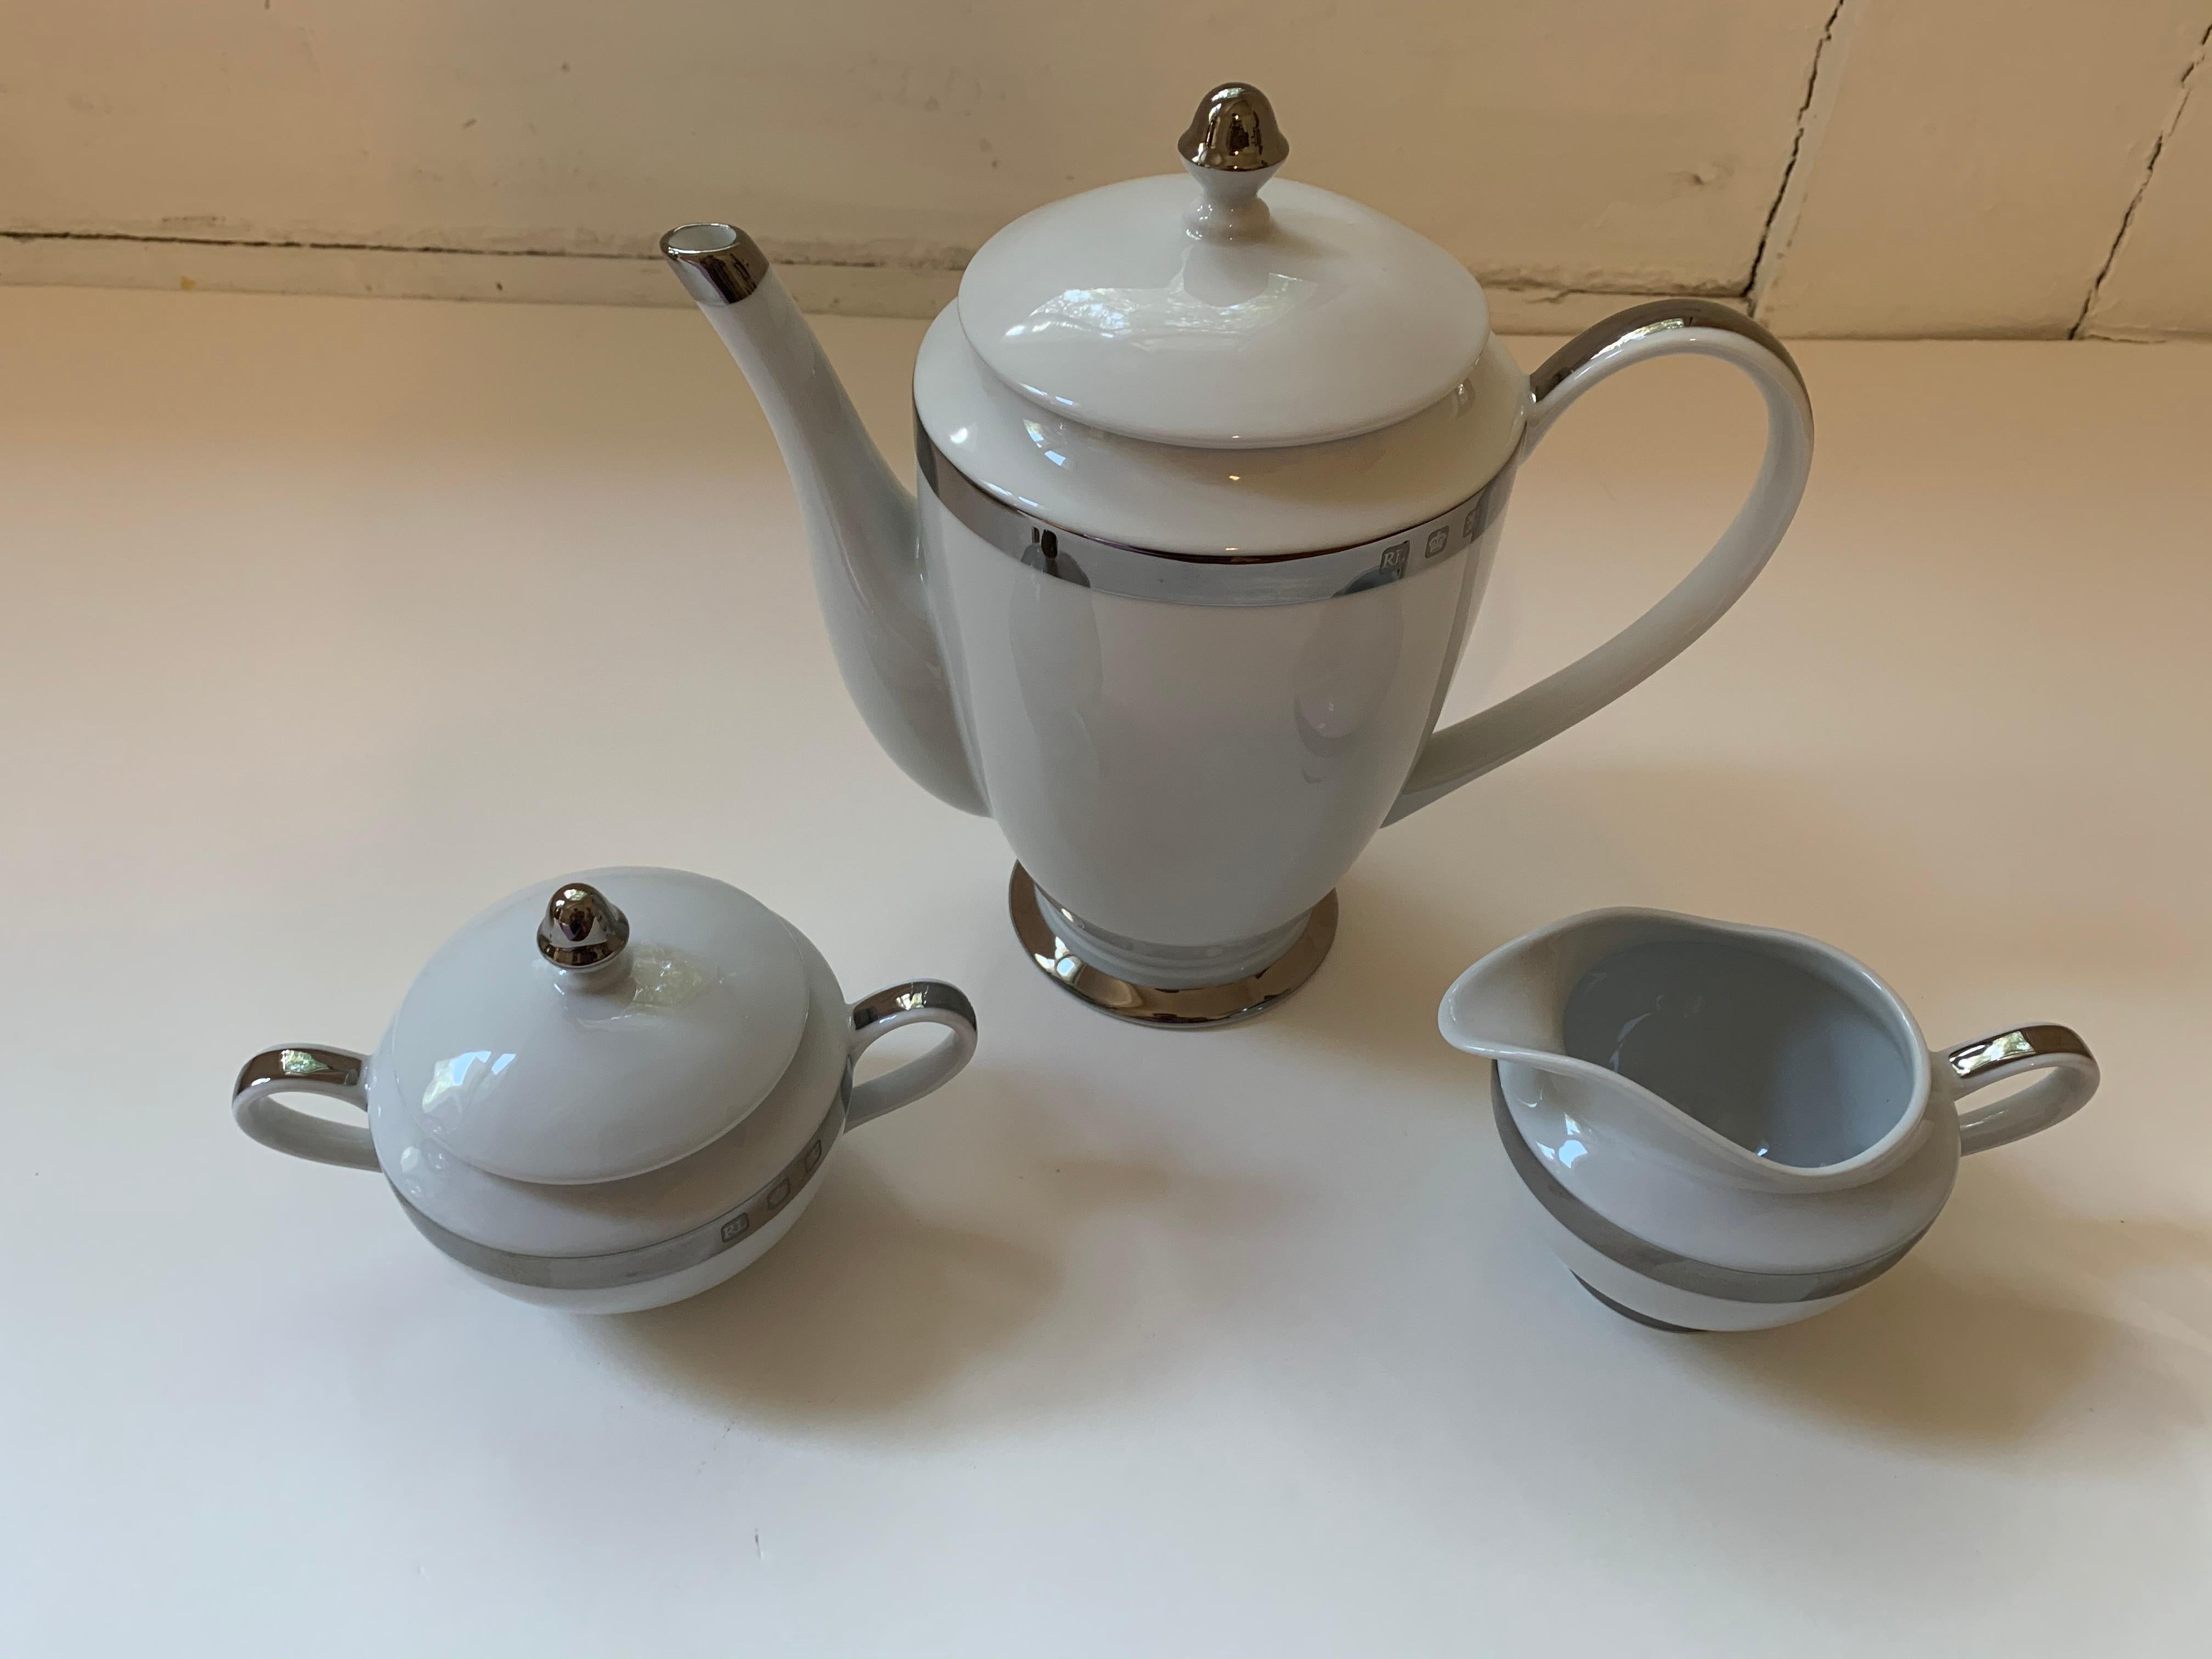 A three (3) piece coffee serving set in the Academy Platinum pattern by Ralph Lauren Home collection. Bone china. Signed. Imported, production period 1995-2002.

Includes a coffee pot with lid, creamer and sugar bowl with lid.

Features a